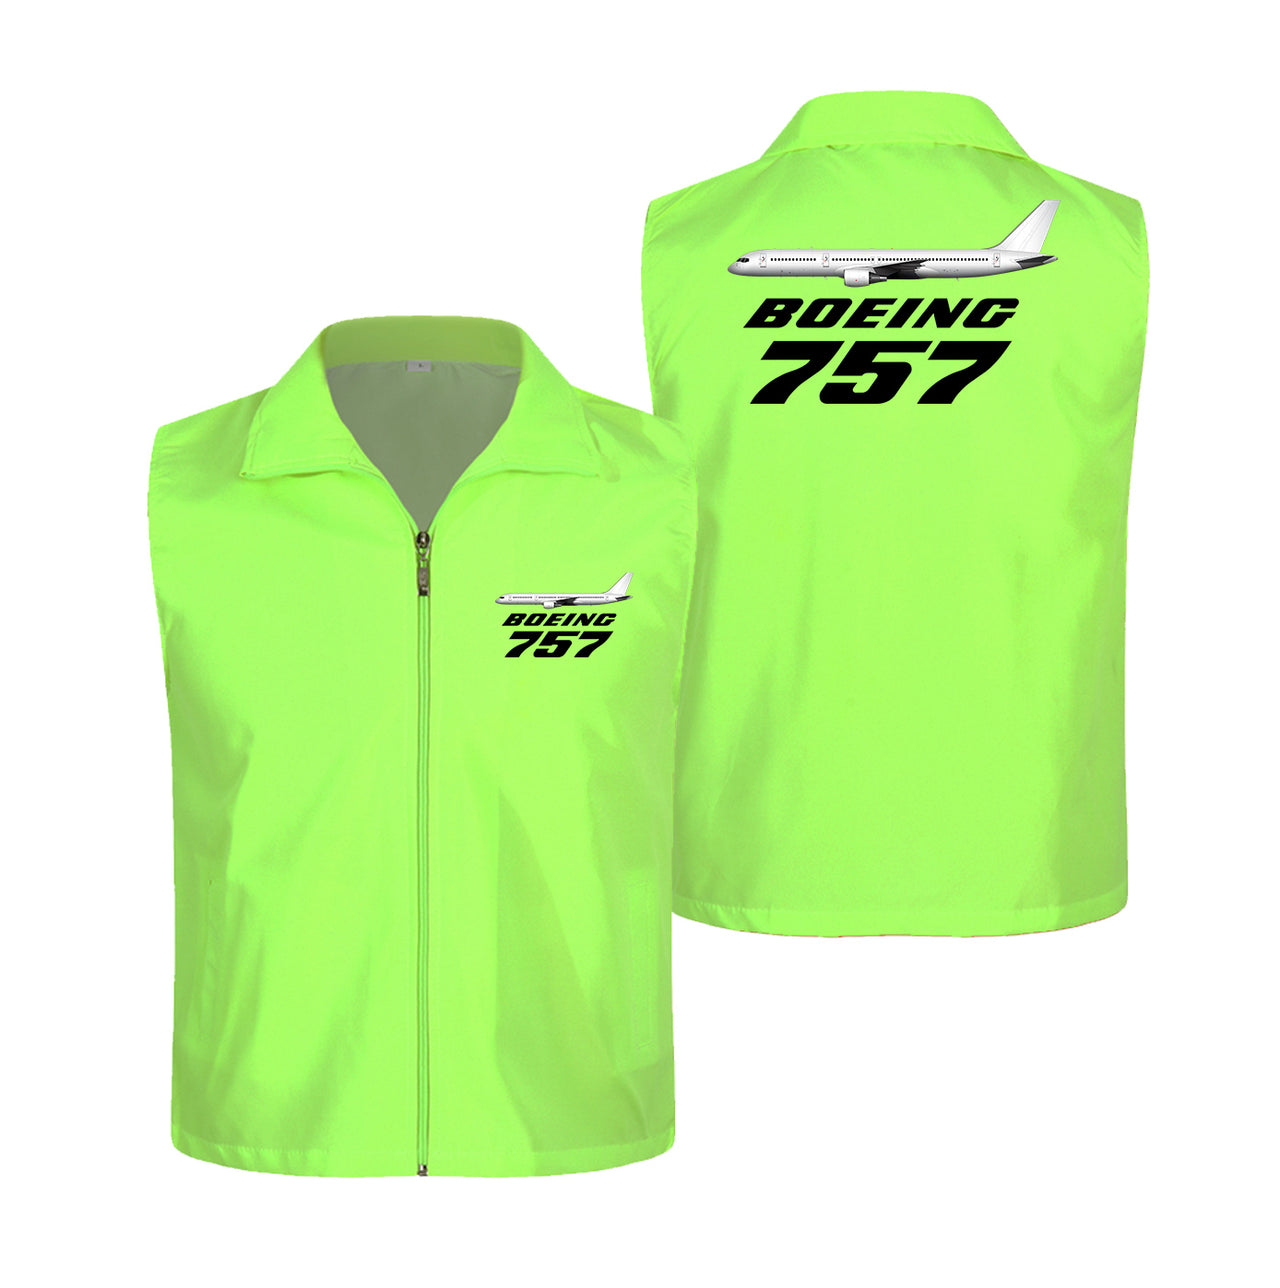 The Boeing 757 Designed Thin Style Vests